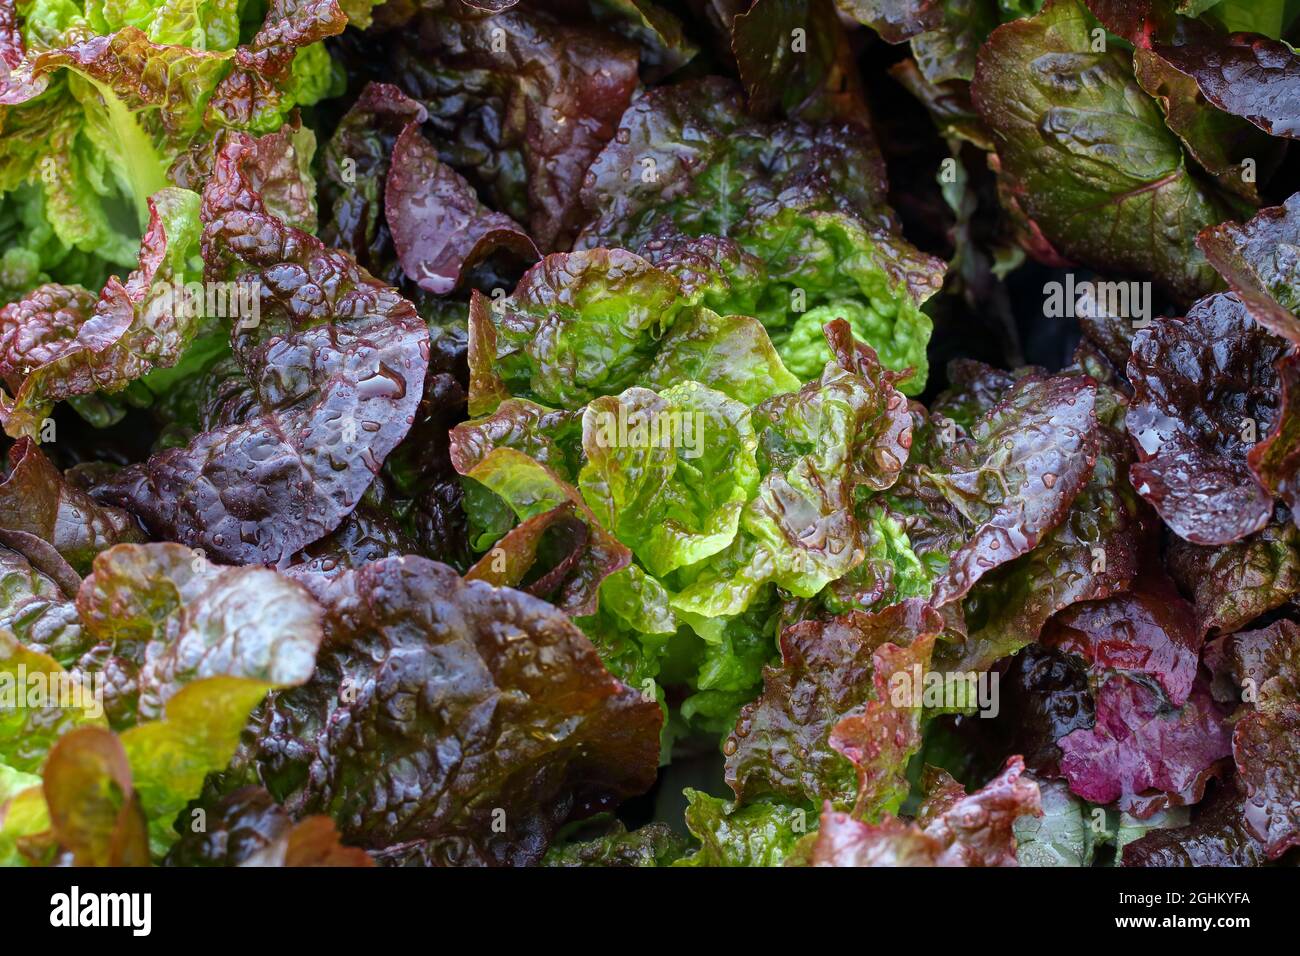 Colorful lettuce leaf background abstract Stock Photo